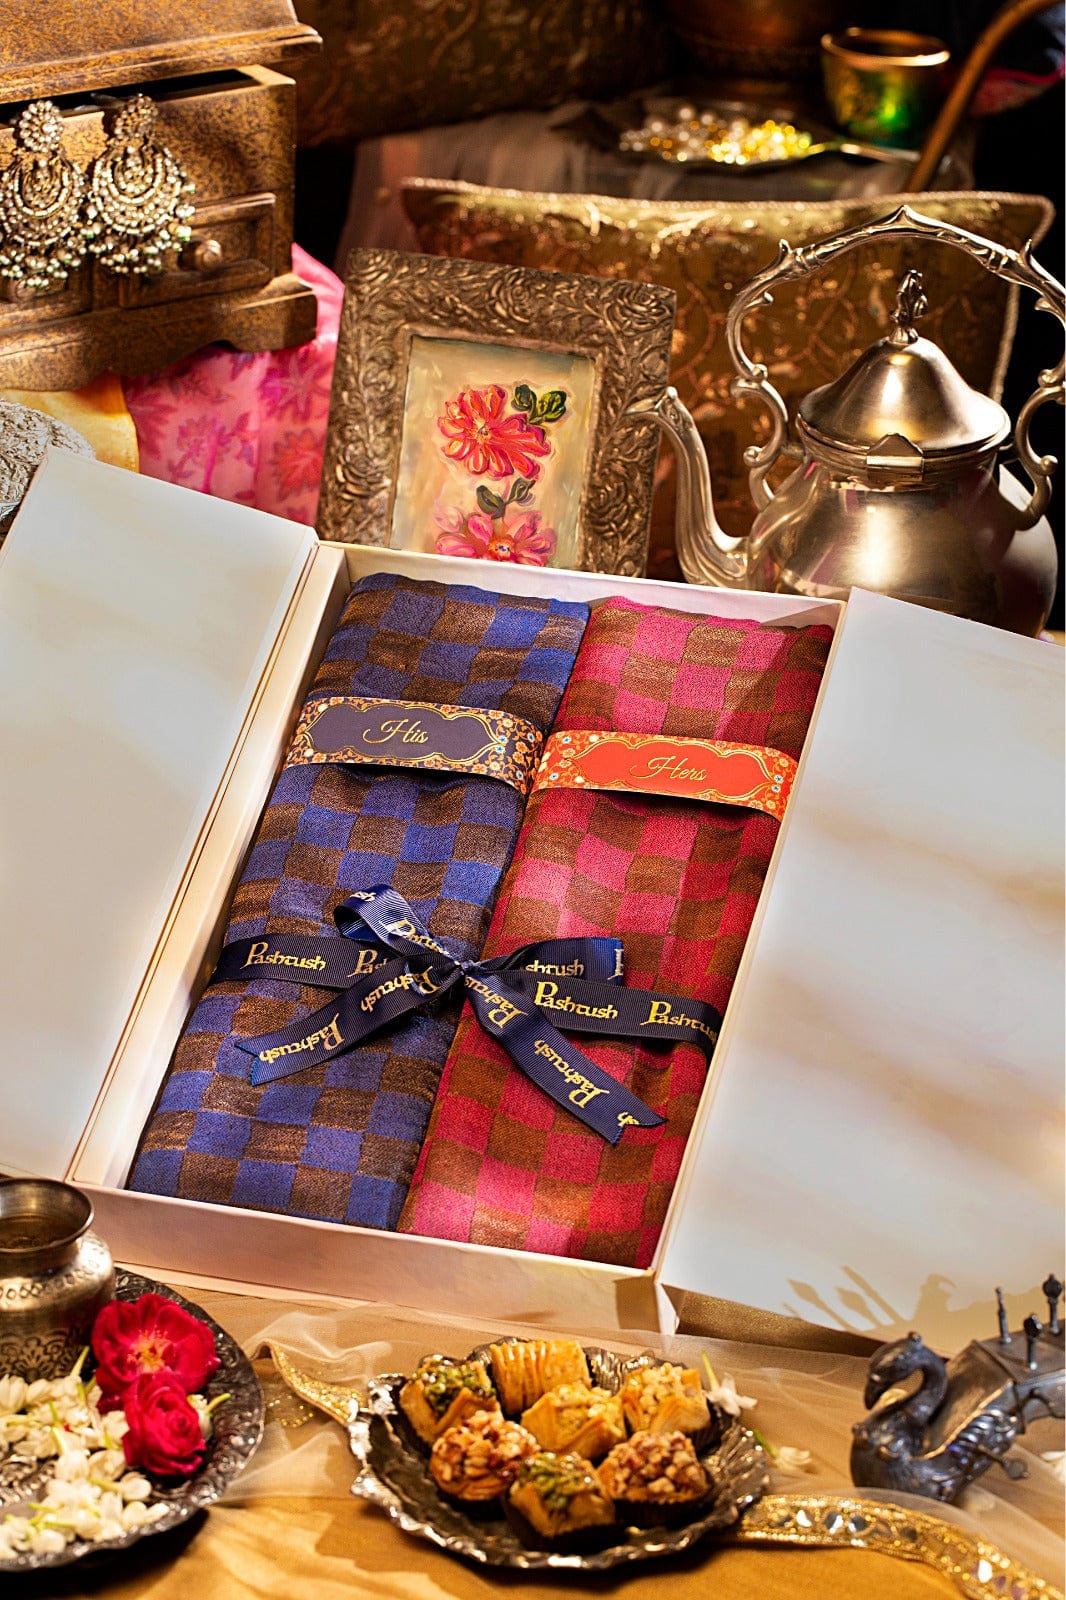 Pashtush India Gift Pack Pashtush His And Her Set Of Checkered Zari Weave Stoles With Premium Gift Box Packaging, Blue and Maroon